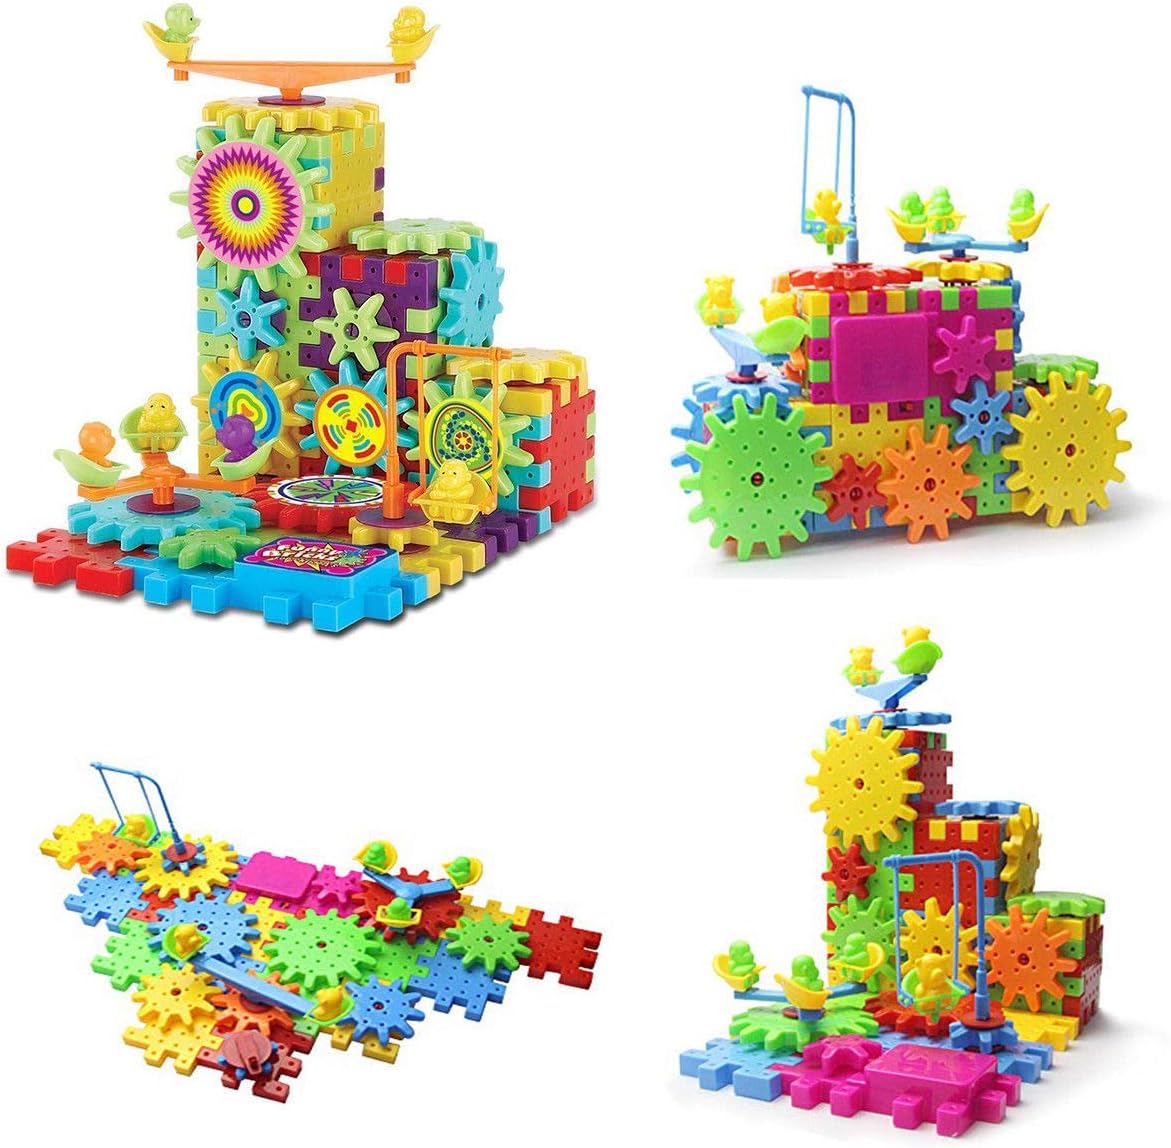 ADEPTNA 81 PCS Educational IQ Interlocking Funny Building Blocks Colorful Shapes Puzzle Electric Bricks Motorized Spinning Gears- A Playful Way To Build Your Child's Creative Skills And Imagination